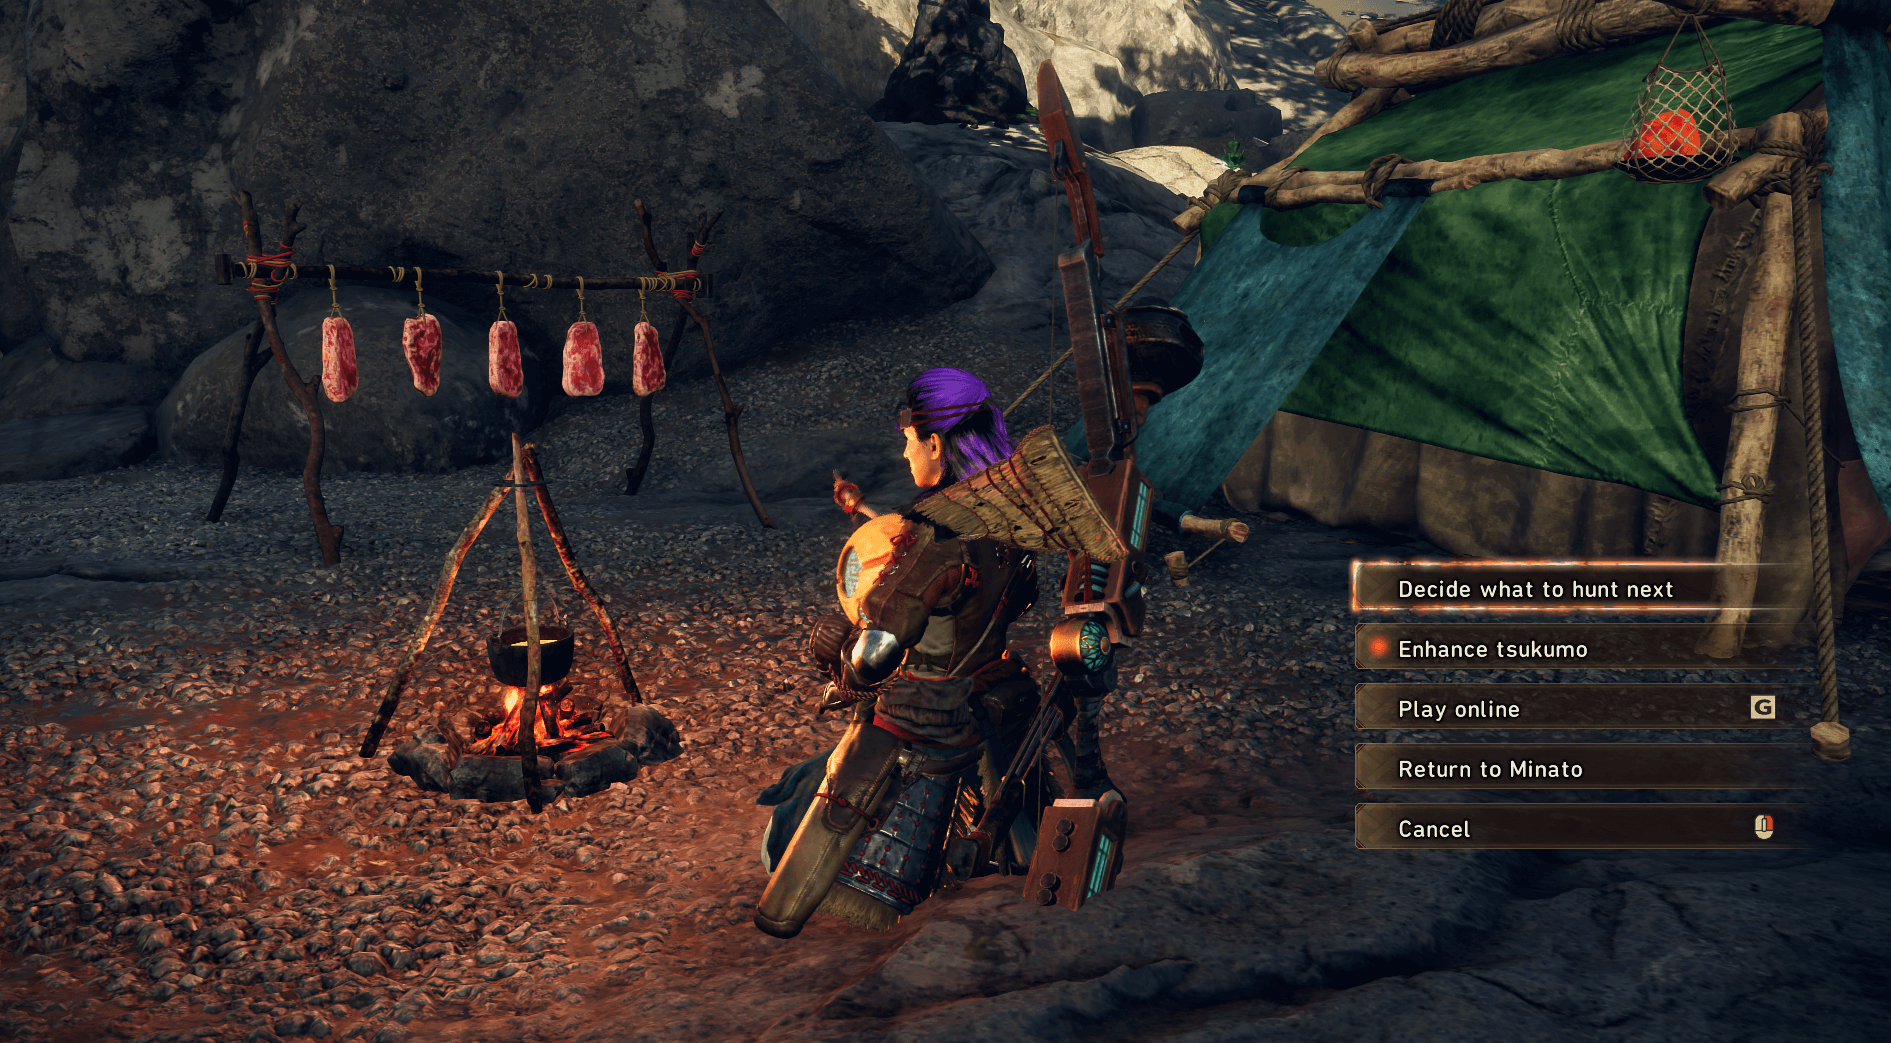 How to use Dragon Pits and build camps in Wild Hearts - Polygon